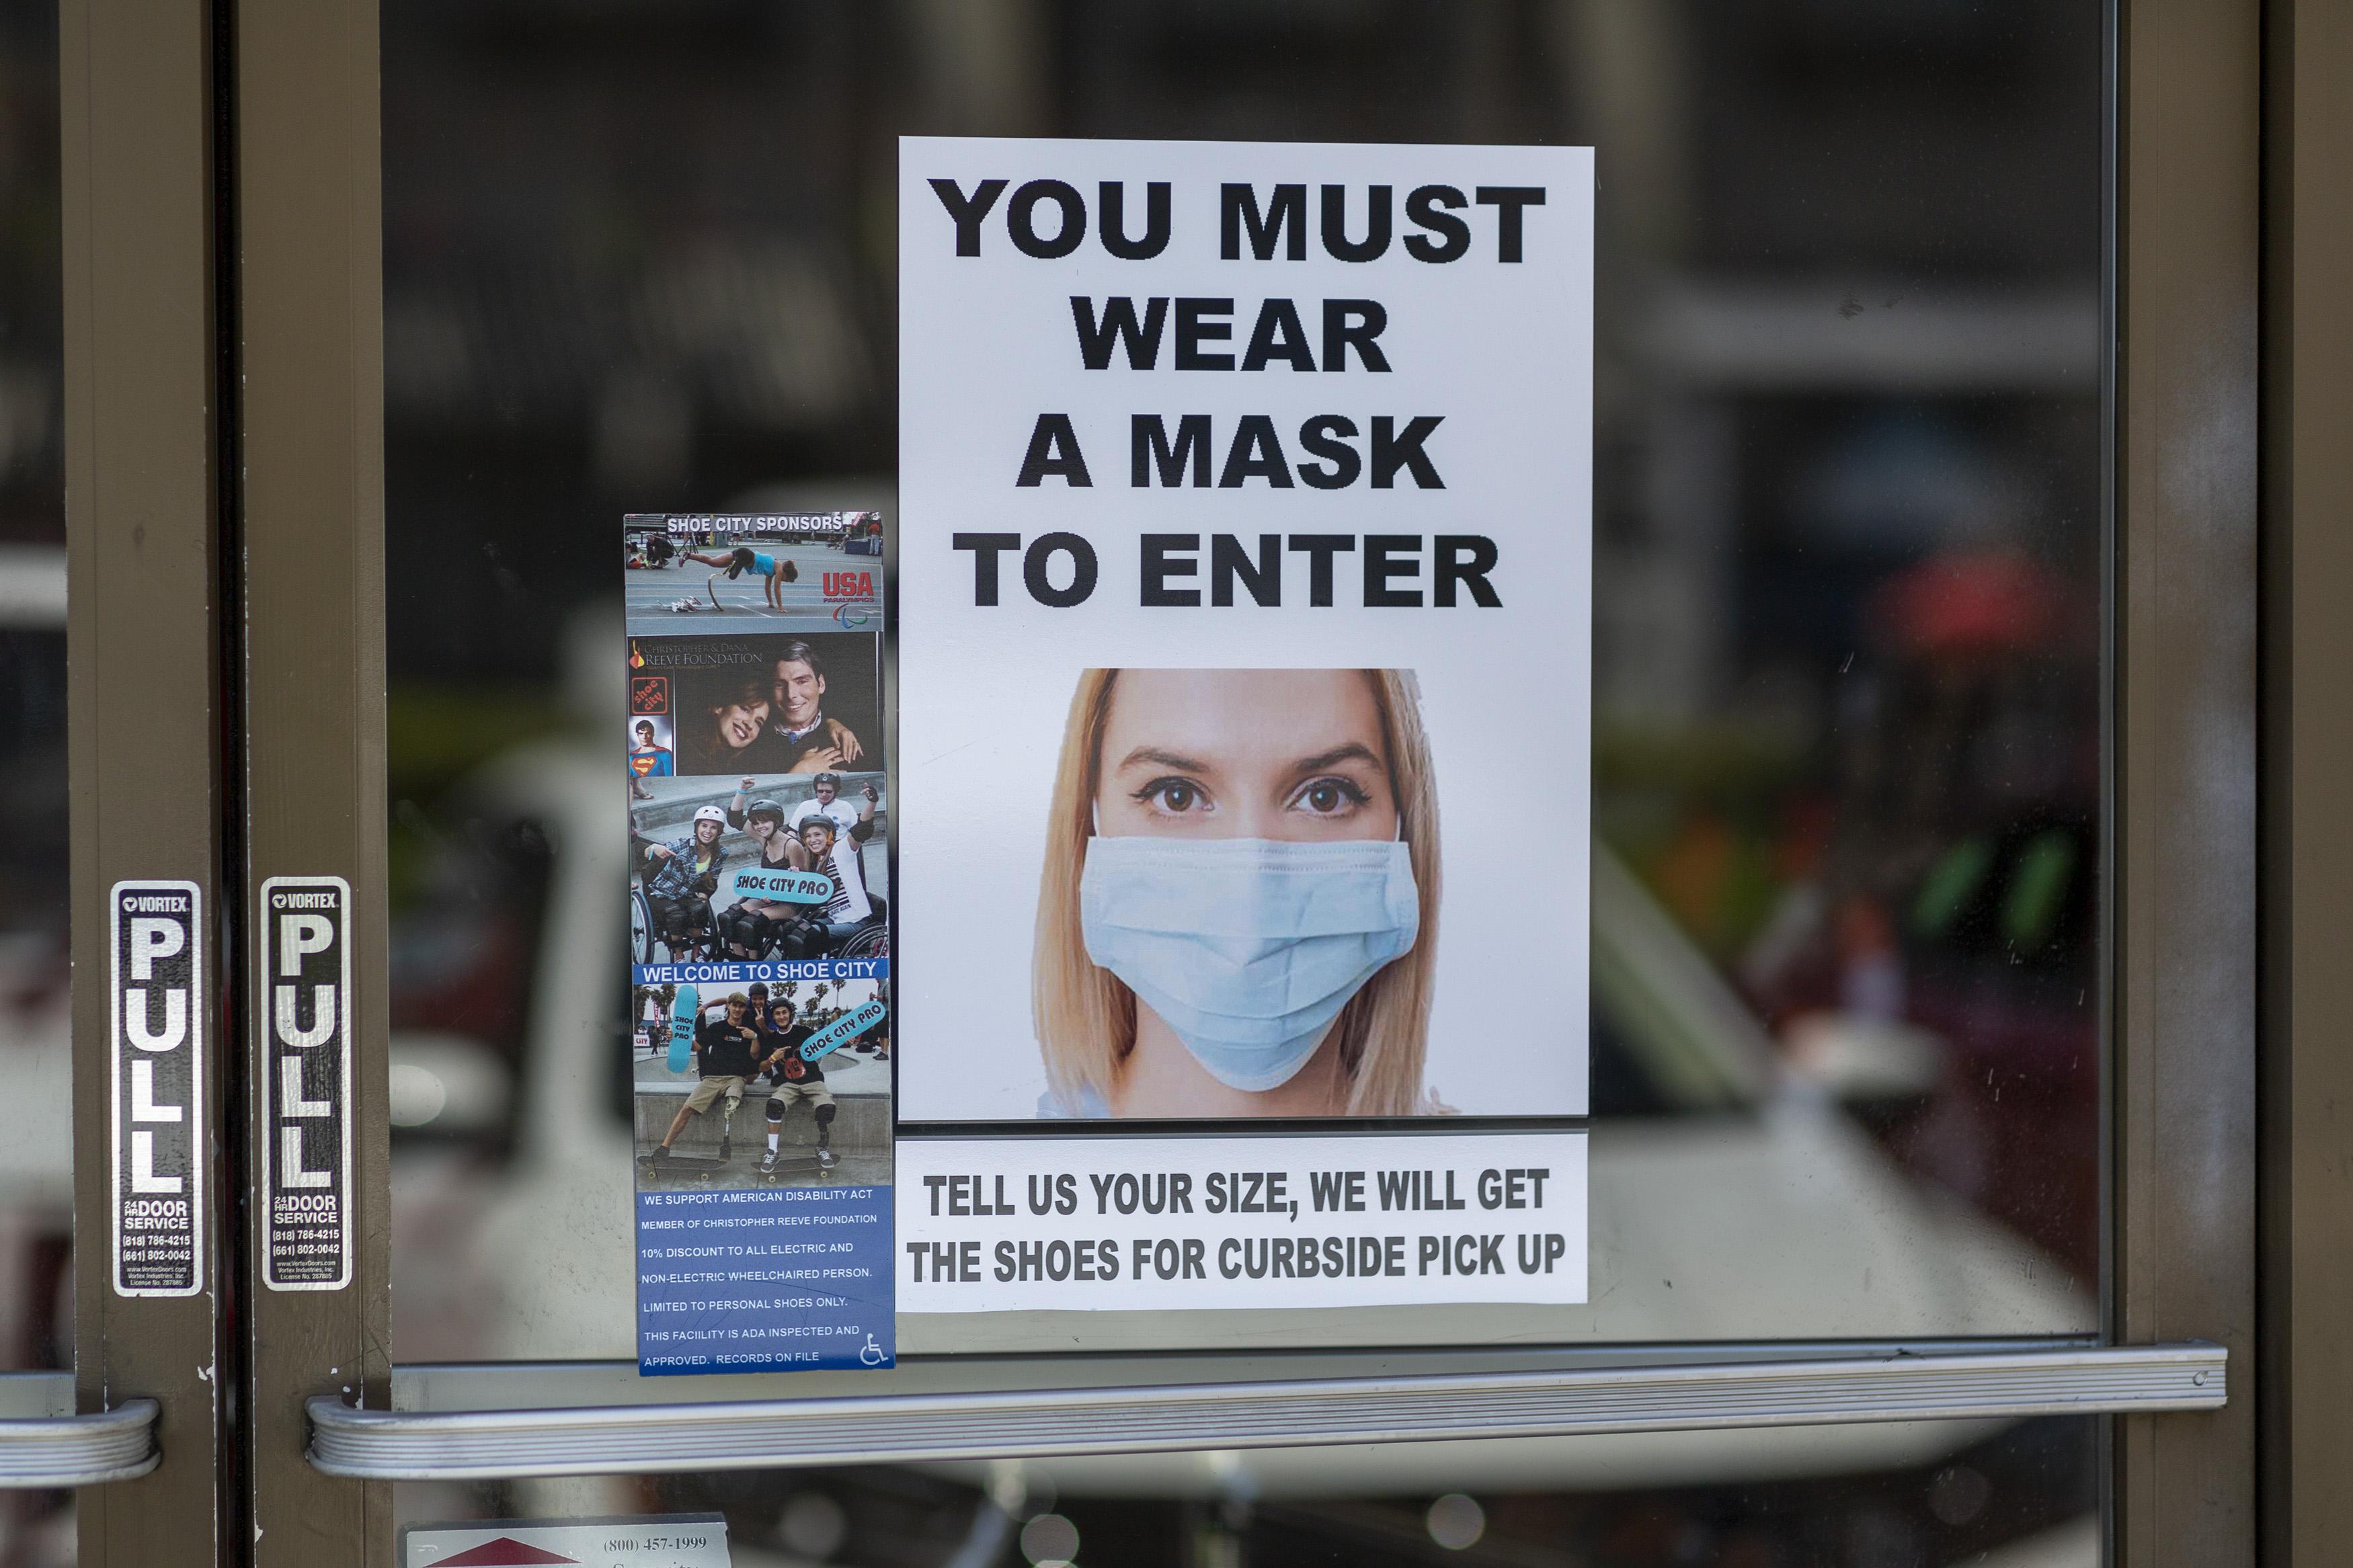 A sign on a glass door says "You must wear a mask to enter" and shows a photo of a woman wearing a face mask.